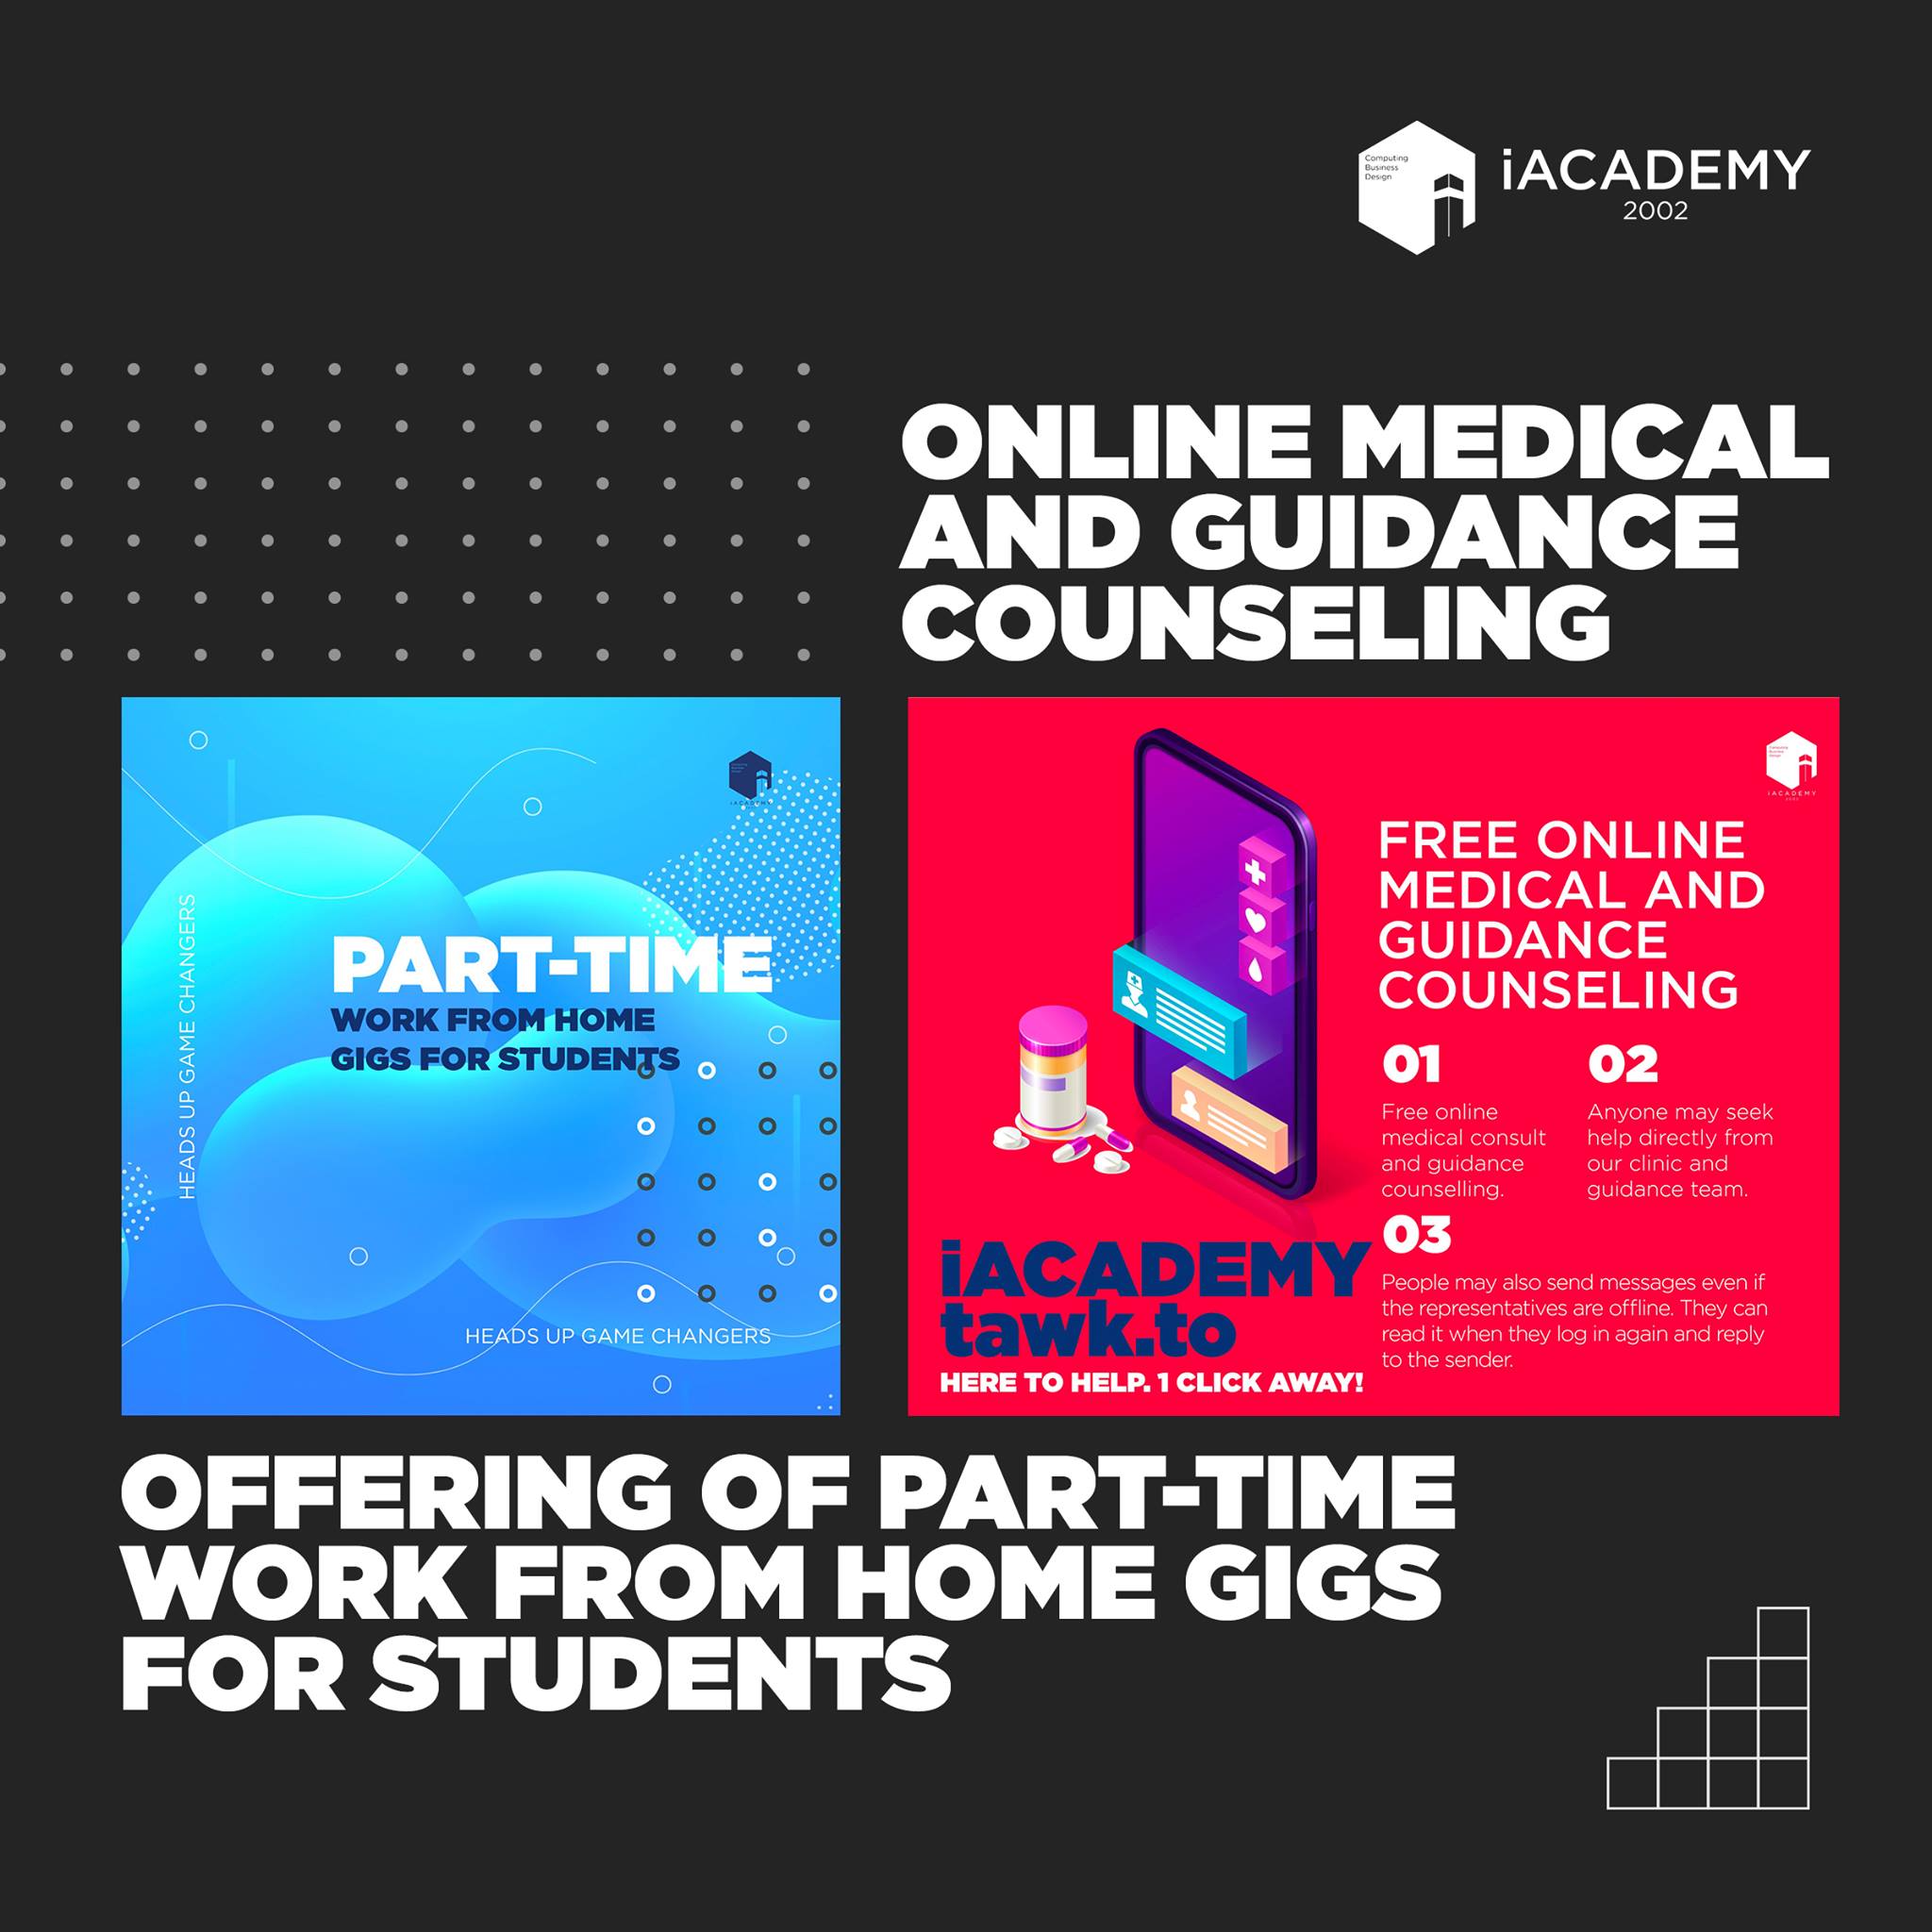 iACADEMY TheraPETS free online medical consultation  and guidance counseling